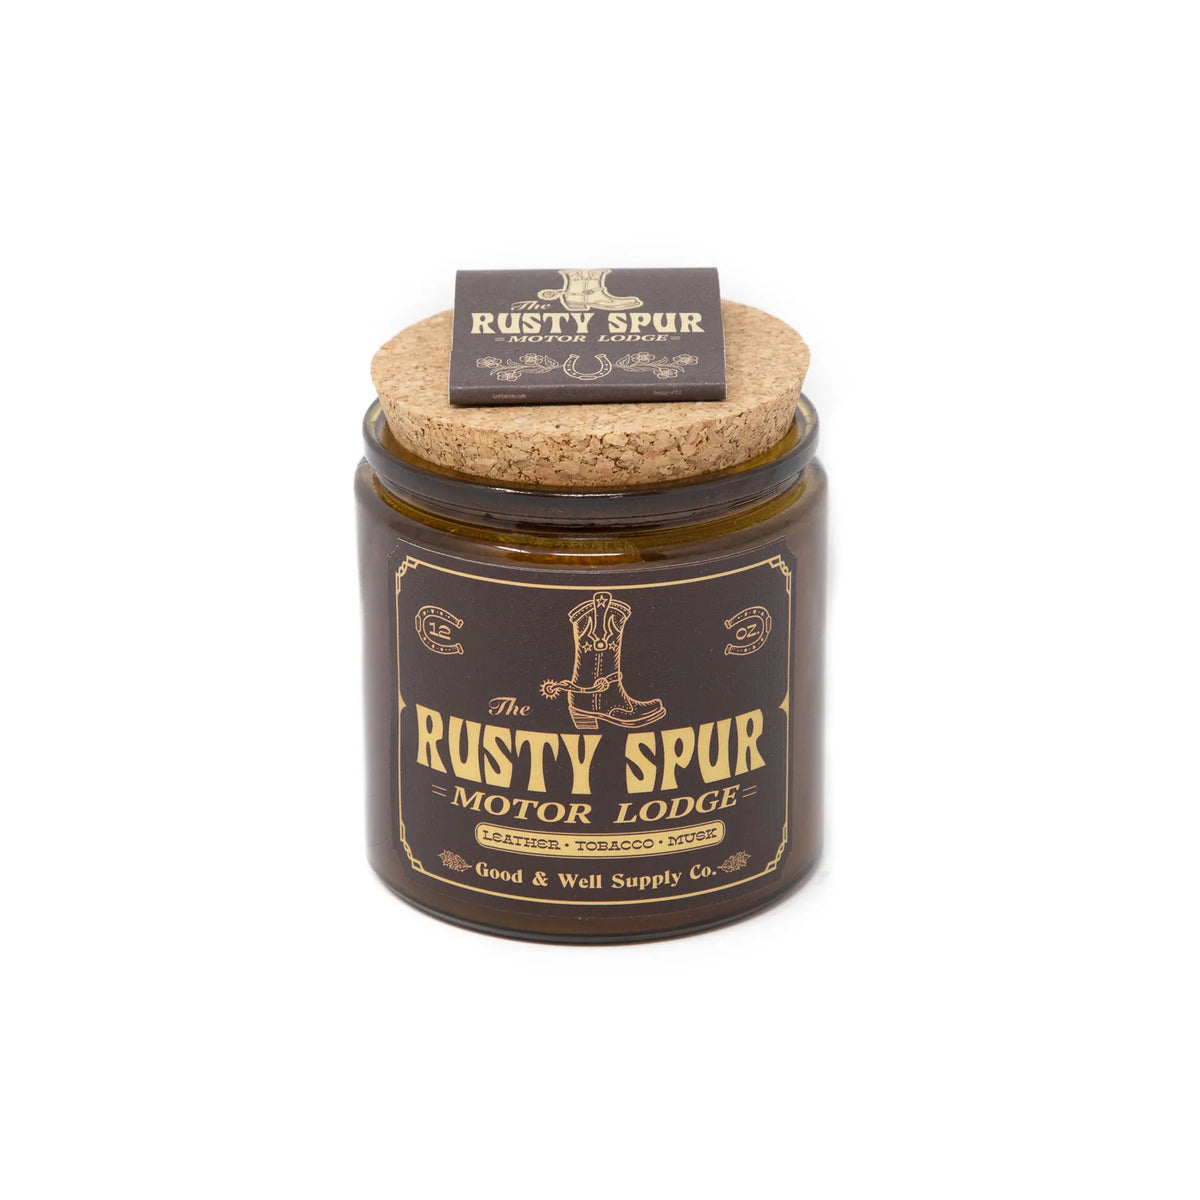 Good & Well Supply Co Rusty Spur Motor Lodge Candle 12oz